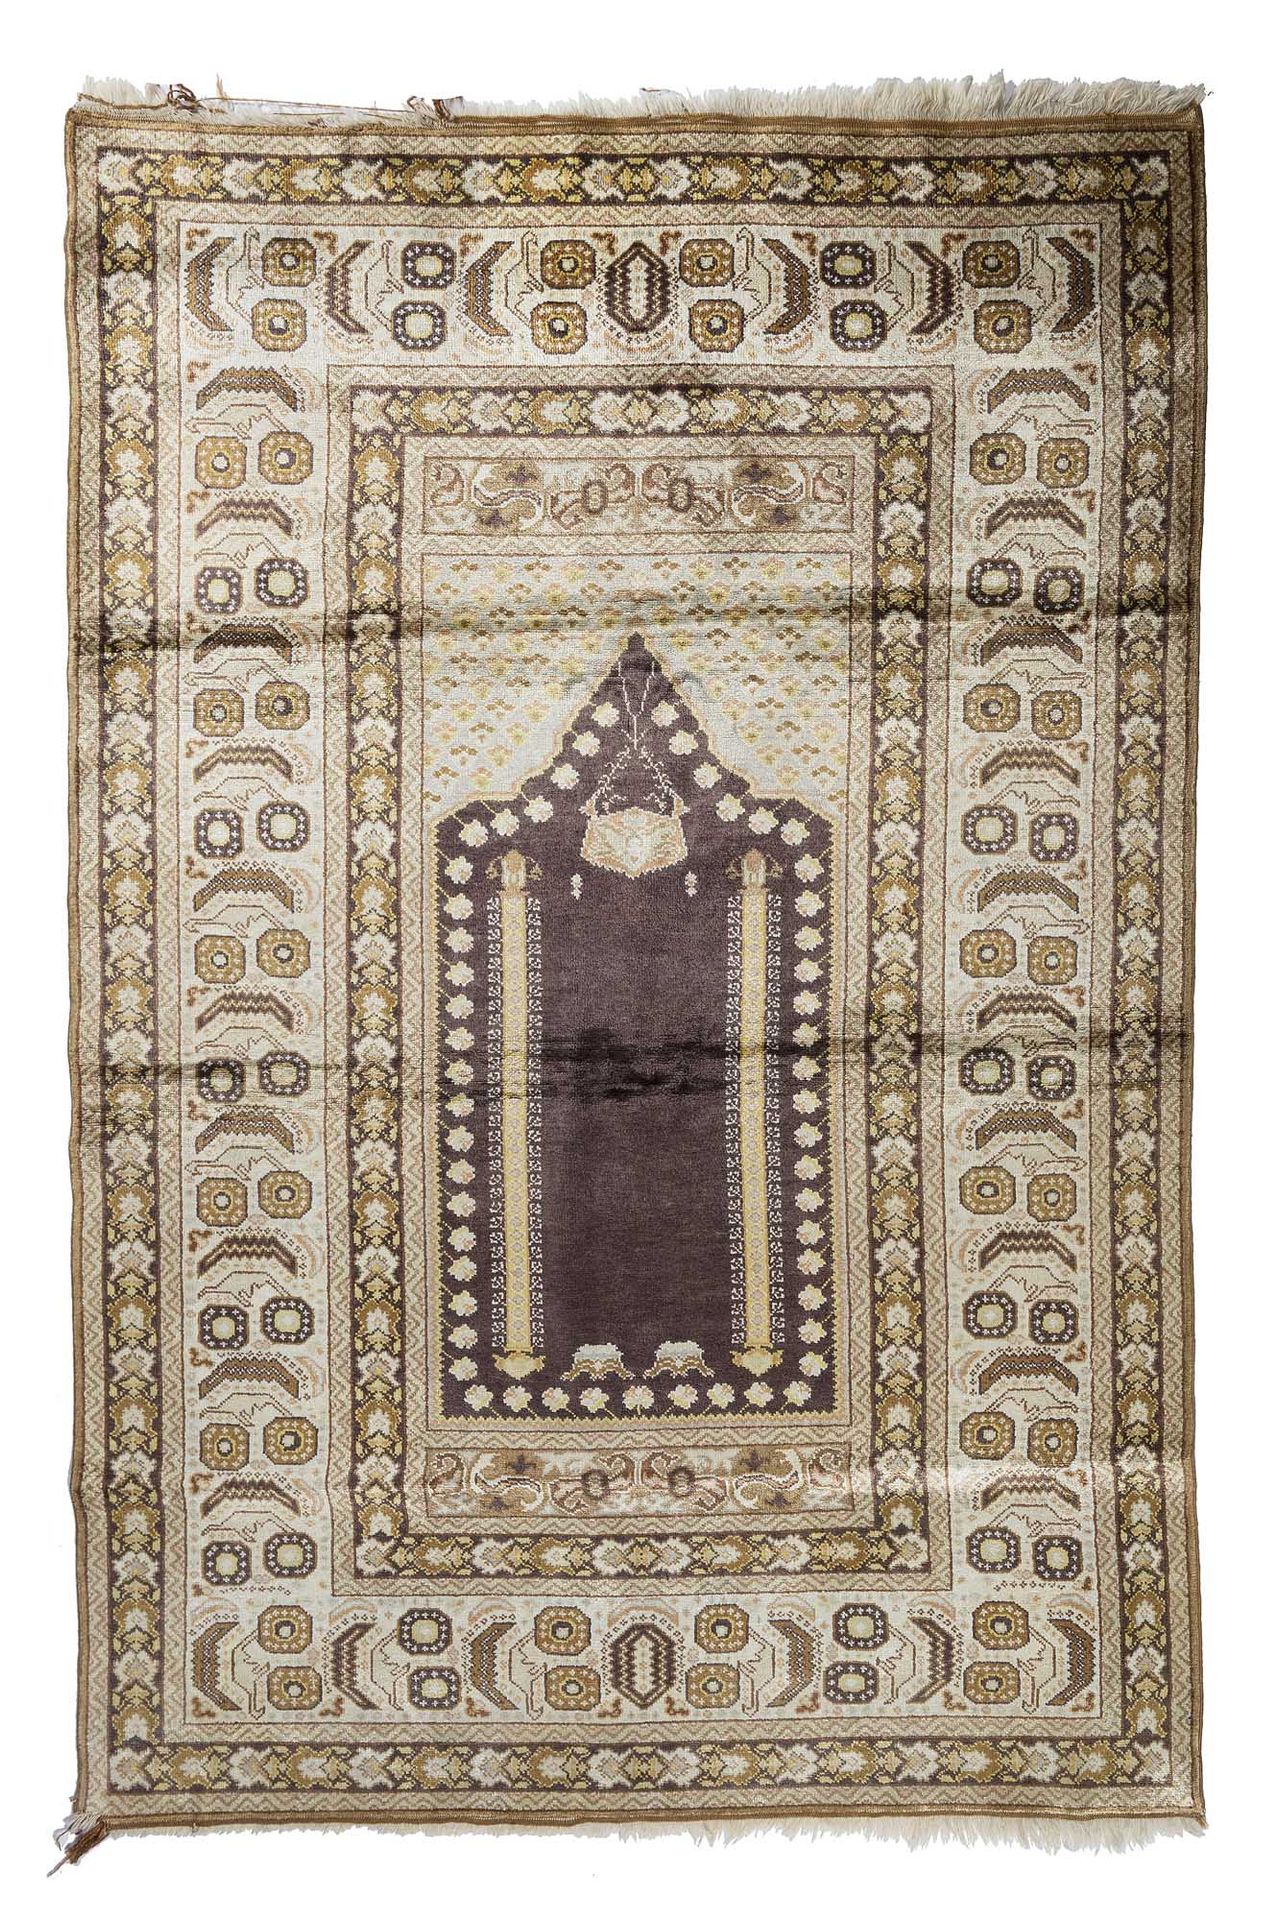 Null Silk KAYCÉRI carpet (Asia Minor), 1st third of the 20th century

Dimensions&hellip;